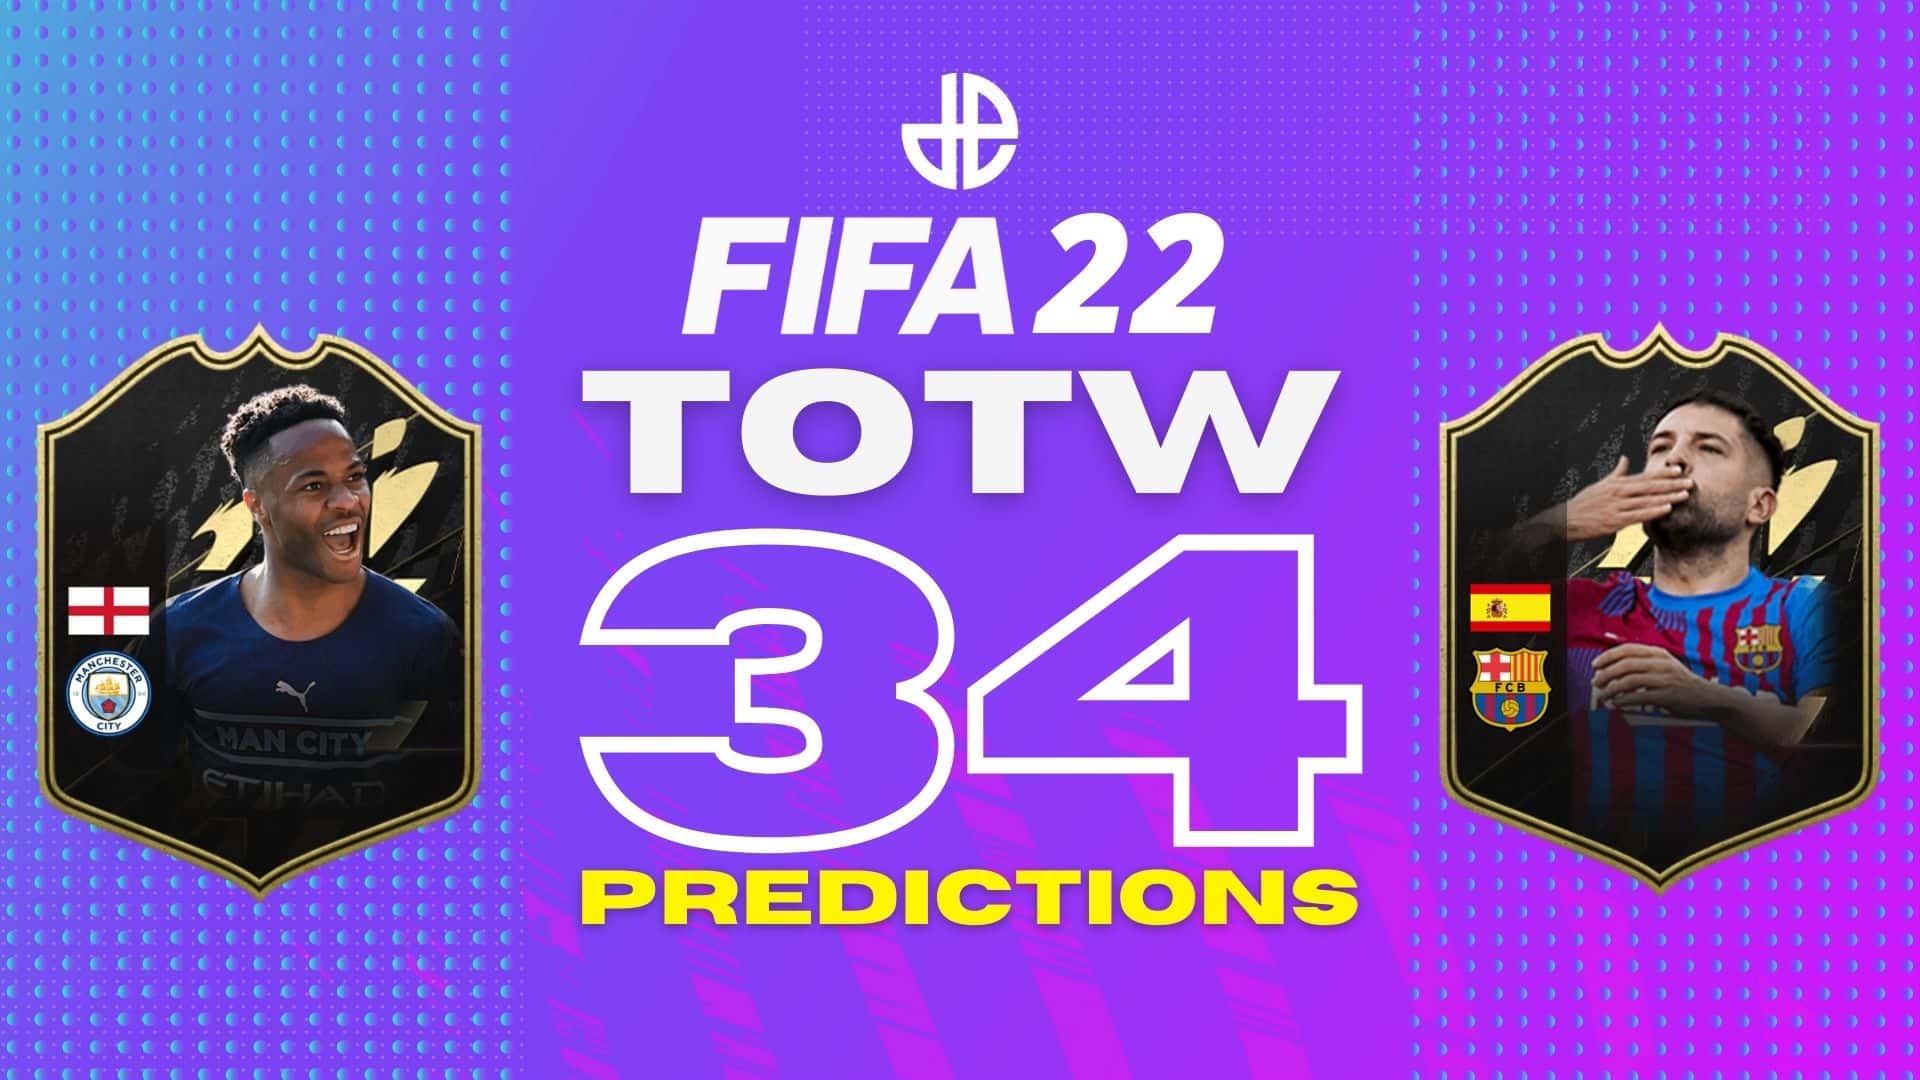 FIFA 22 TOTW 34 cards and predictions